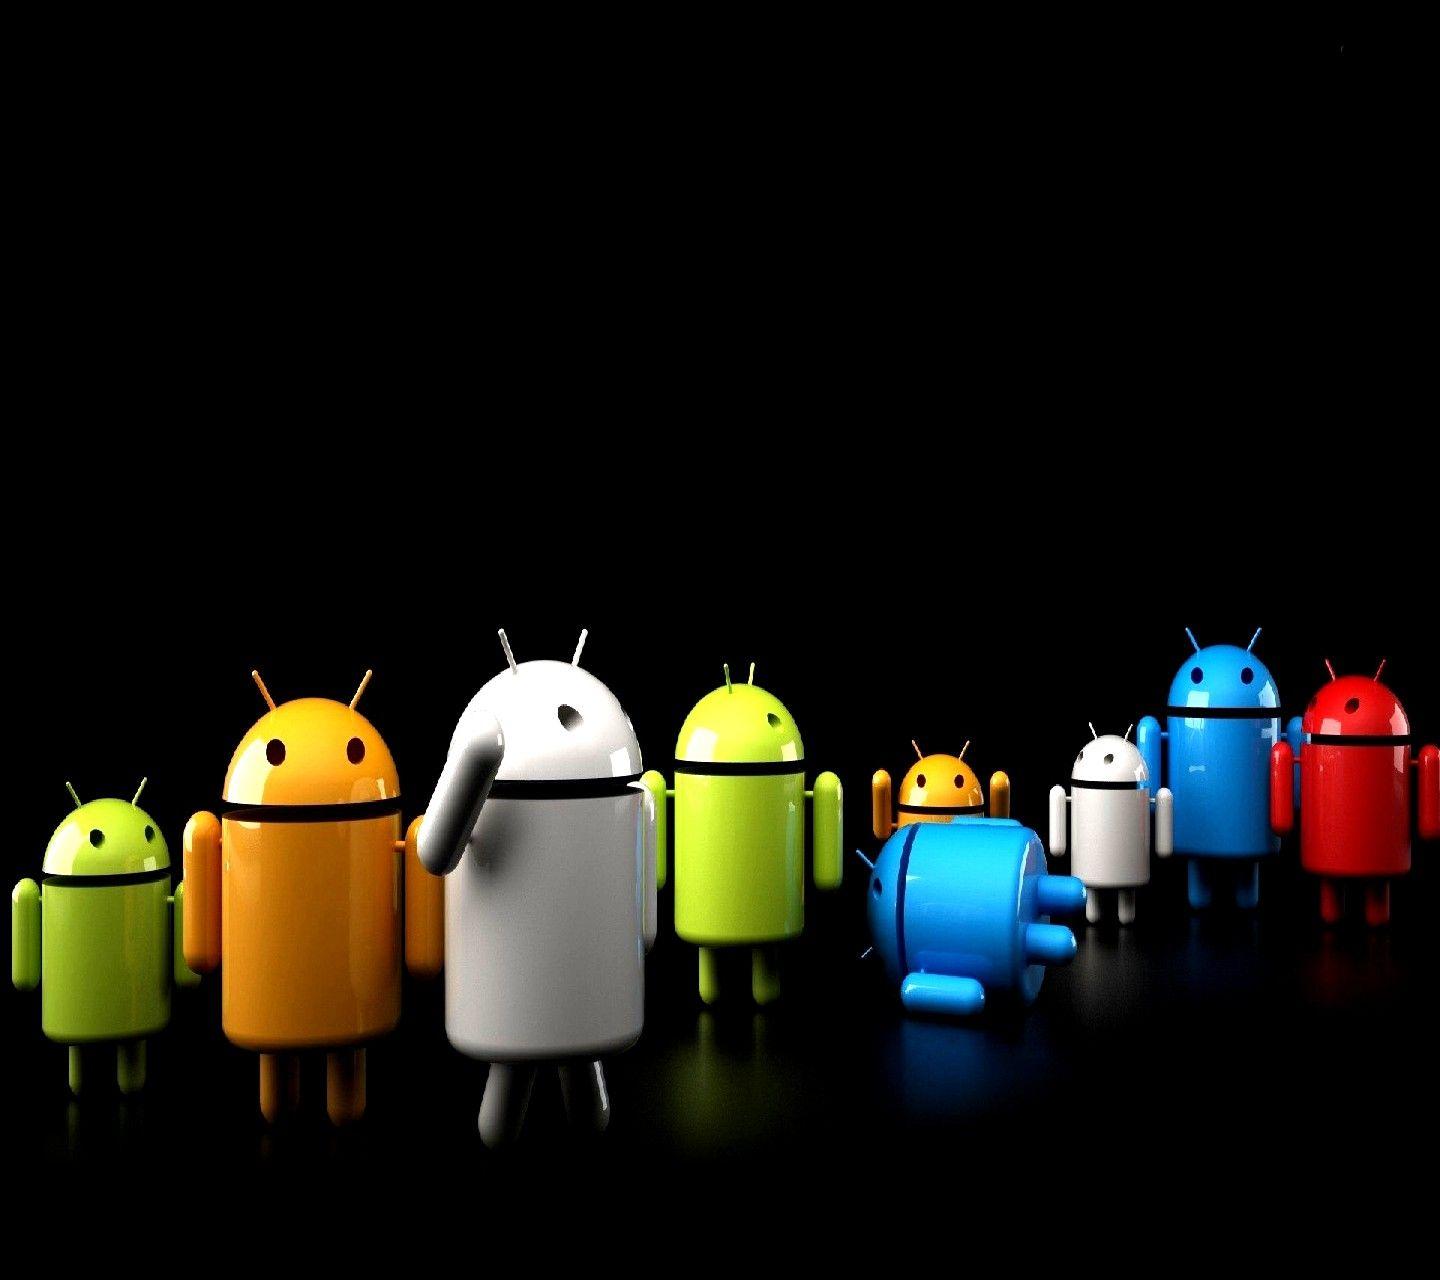 Awesome Android Logo Wallpapers And Backgrounds For Computer Brands Logos  Picture Android Hd Wallpaper Logo  照片图像